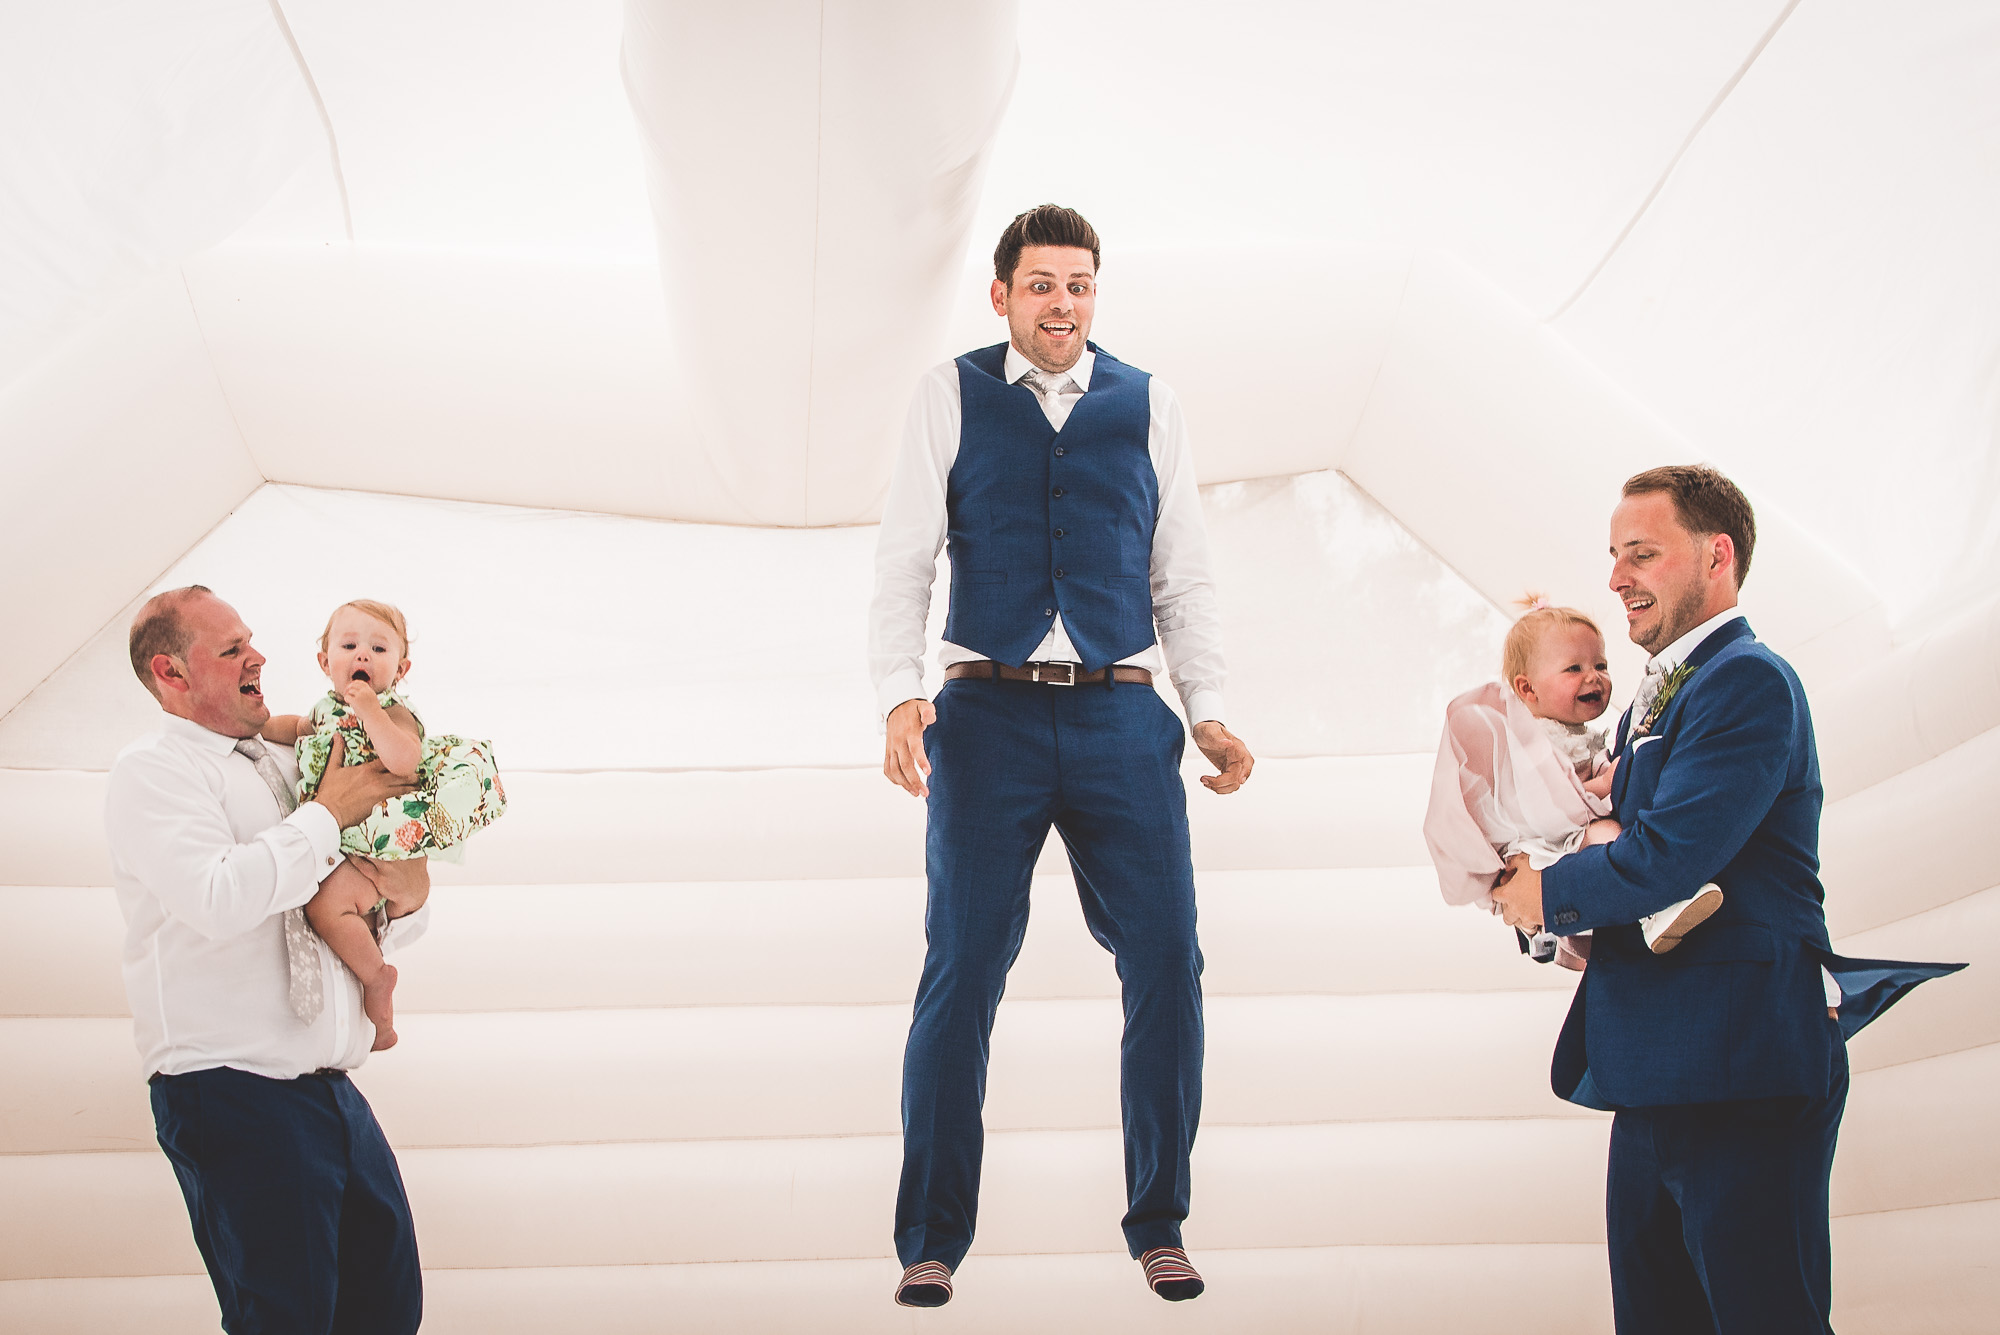 A group of groomsmen are jumping in an inflatable bouncy castle while the wedding photographer captures the moment.